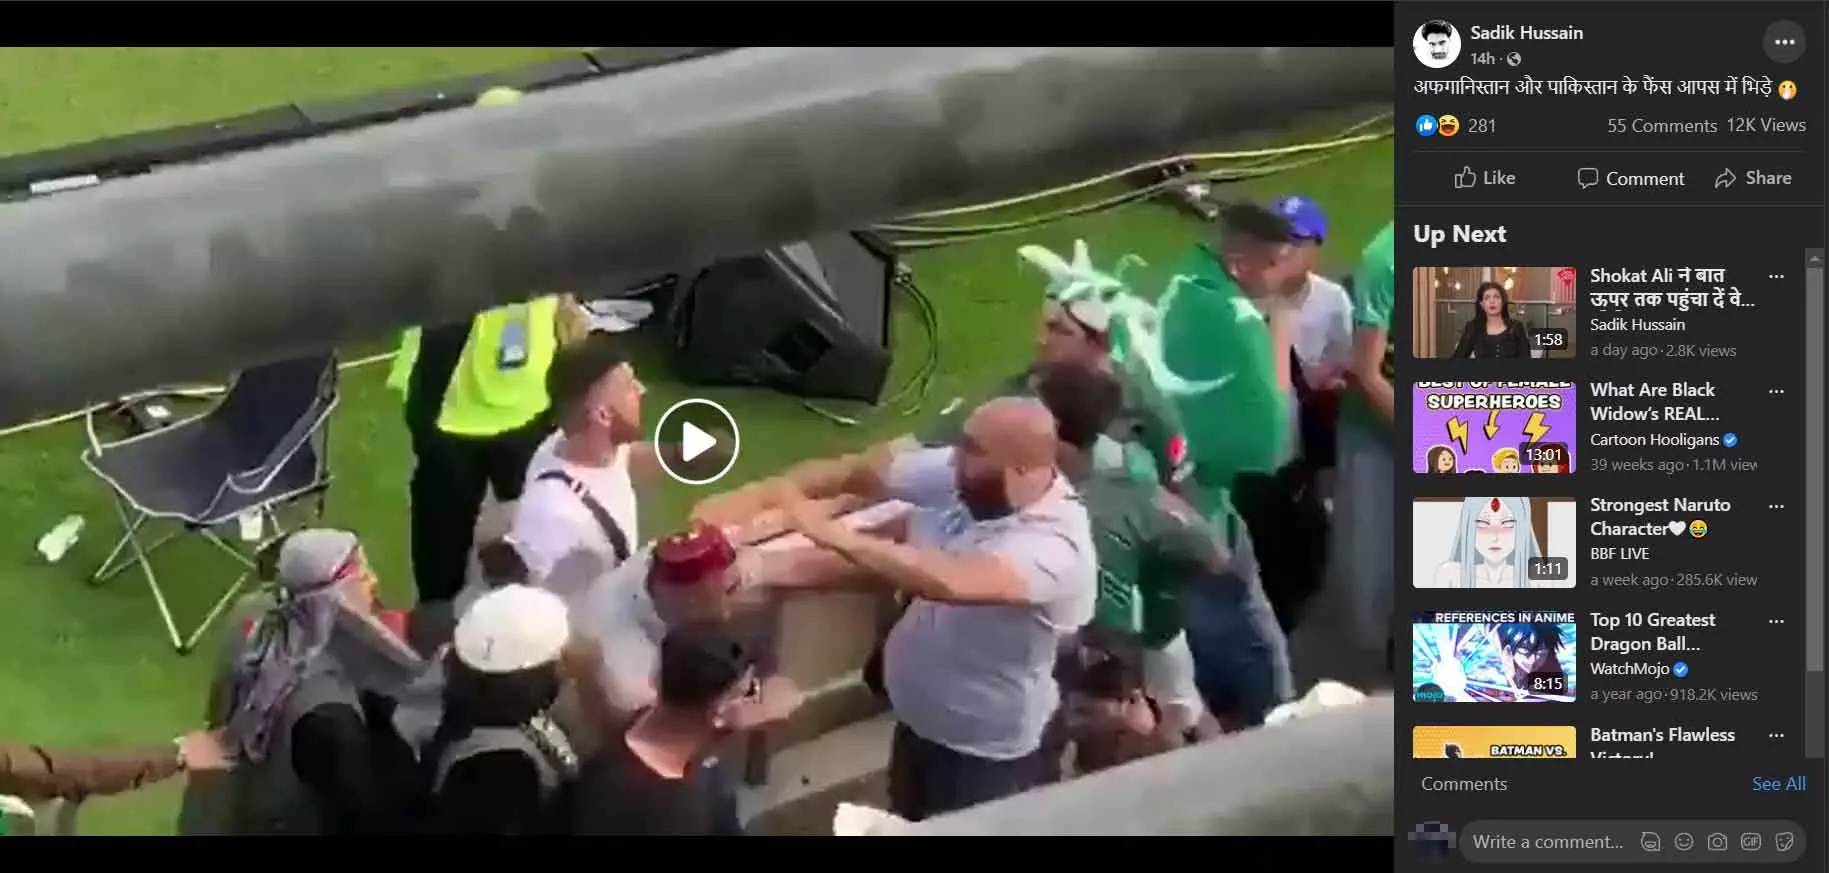 Old Video Of Afghan And Pakistani Fans Clashing Revived As Recent BOOM